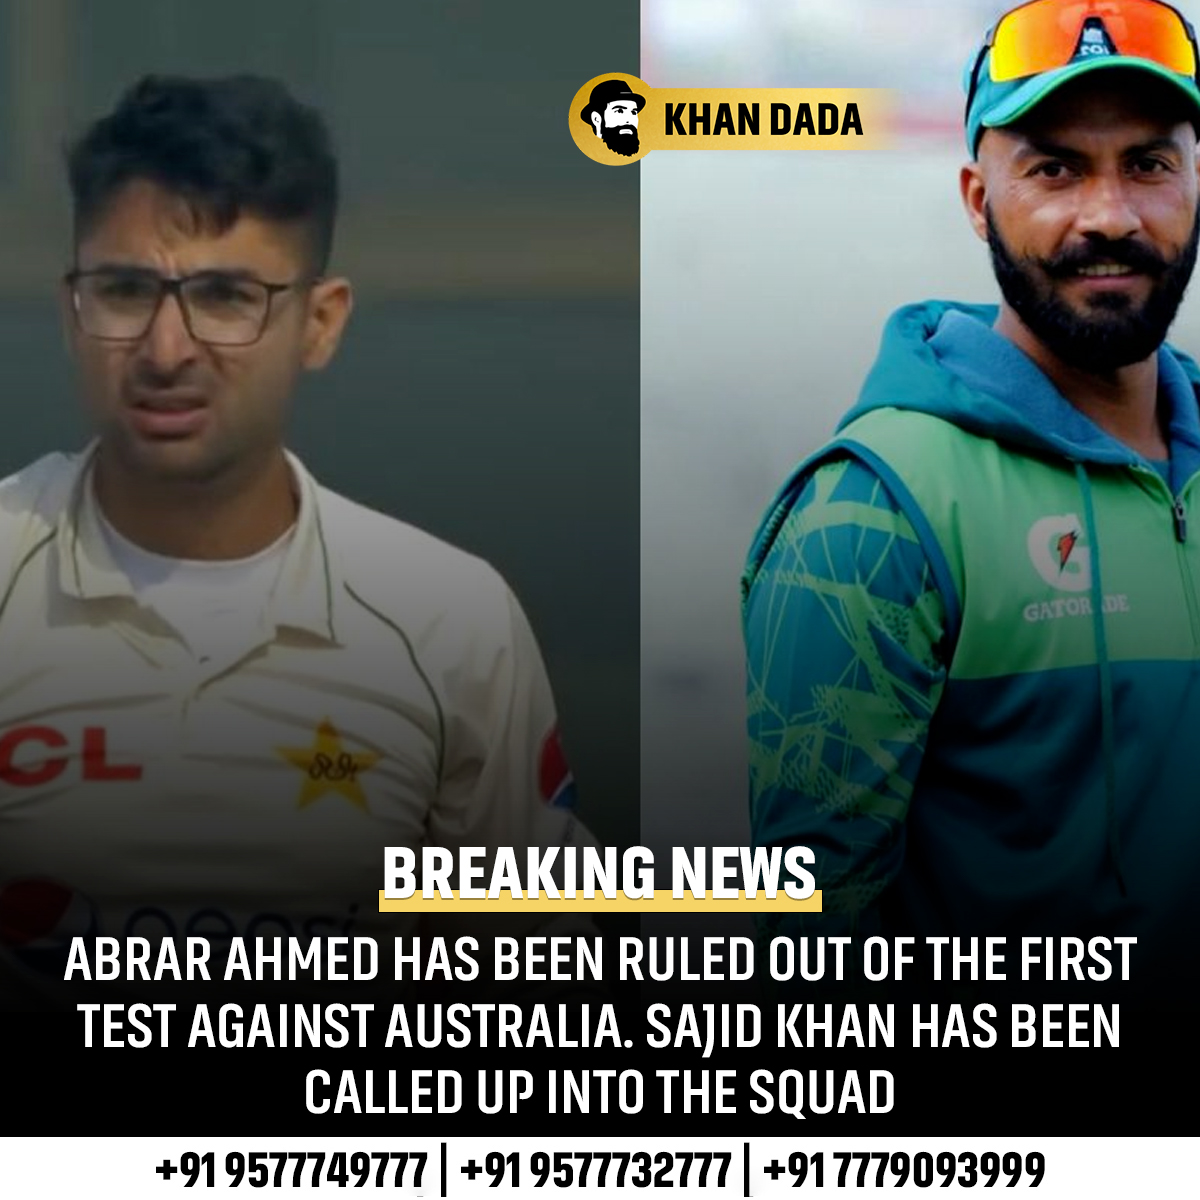 Abrar Ahmed injured his knee during the warm-up game against the Prime Minister XI. Sajid Khan will replace him in the squad for the first Perth Test.🦵🤕🤒
.
.
.
#AbrarAhmed #AUSvsPAK #Test #perthhills #TravisHead #Virushka #AnimalBoxOffice #MunAra #Bangtan #ITA2023 #BBL13